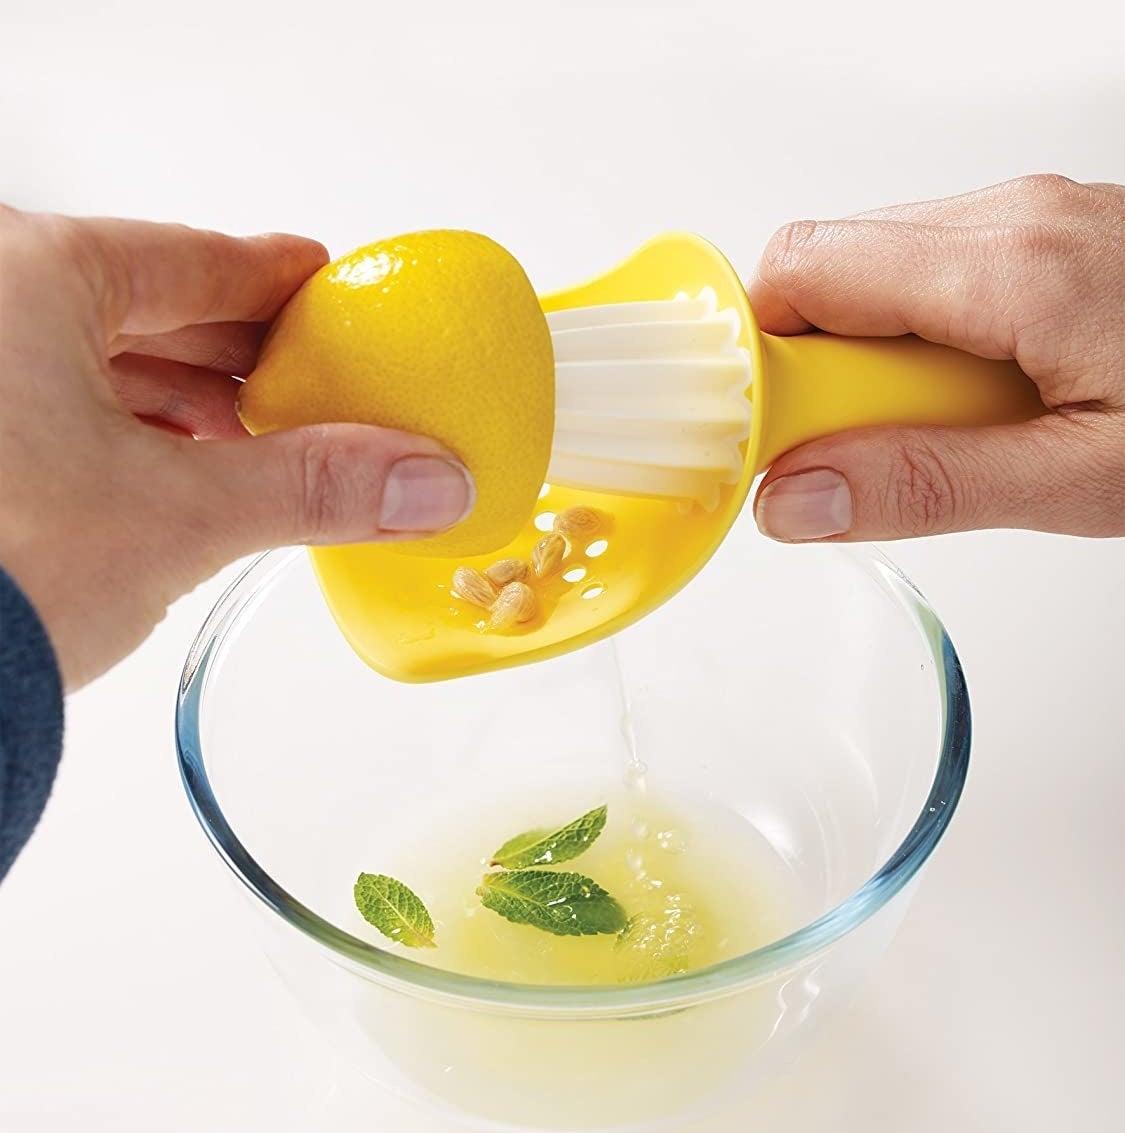 A person juices a lemon over a bowl where a few seeds are caught in the colander attachment